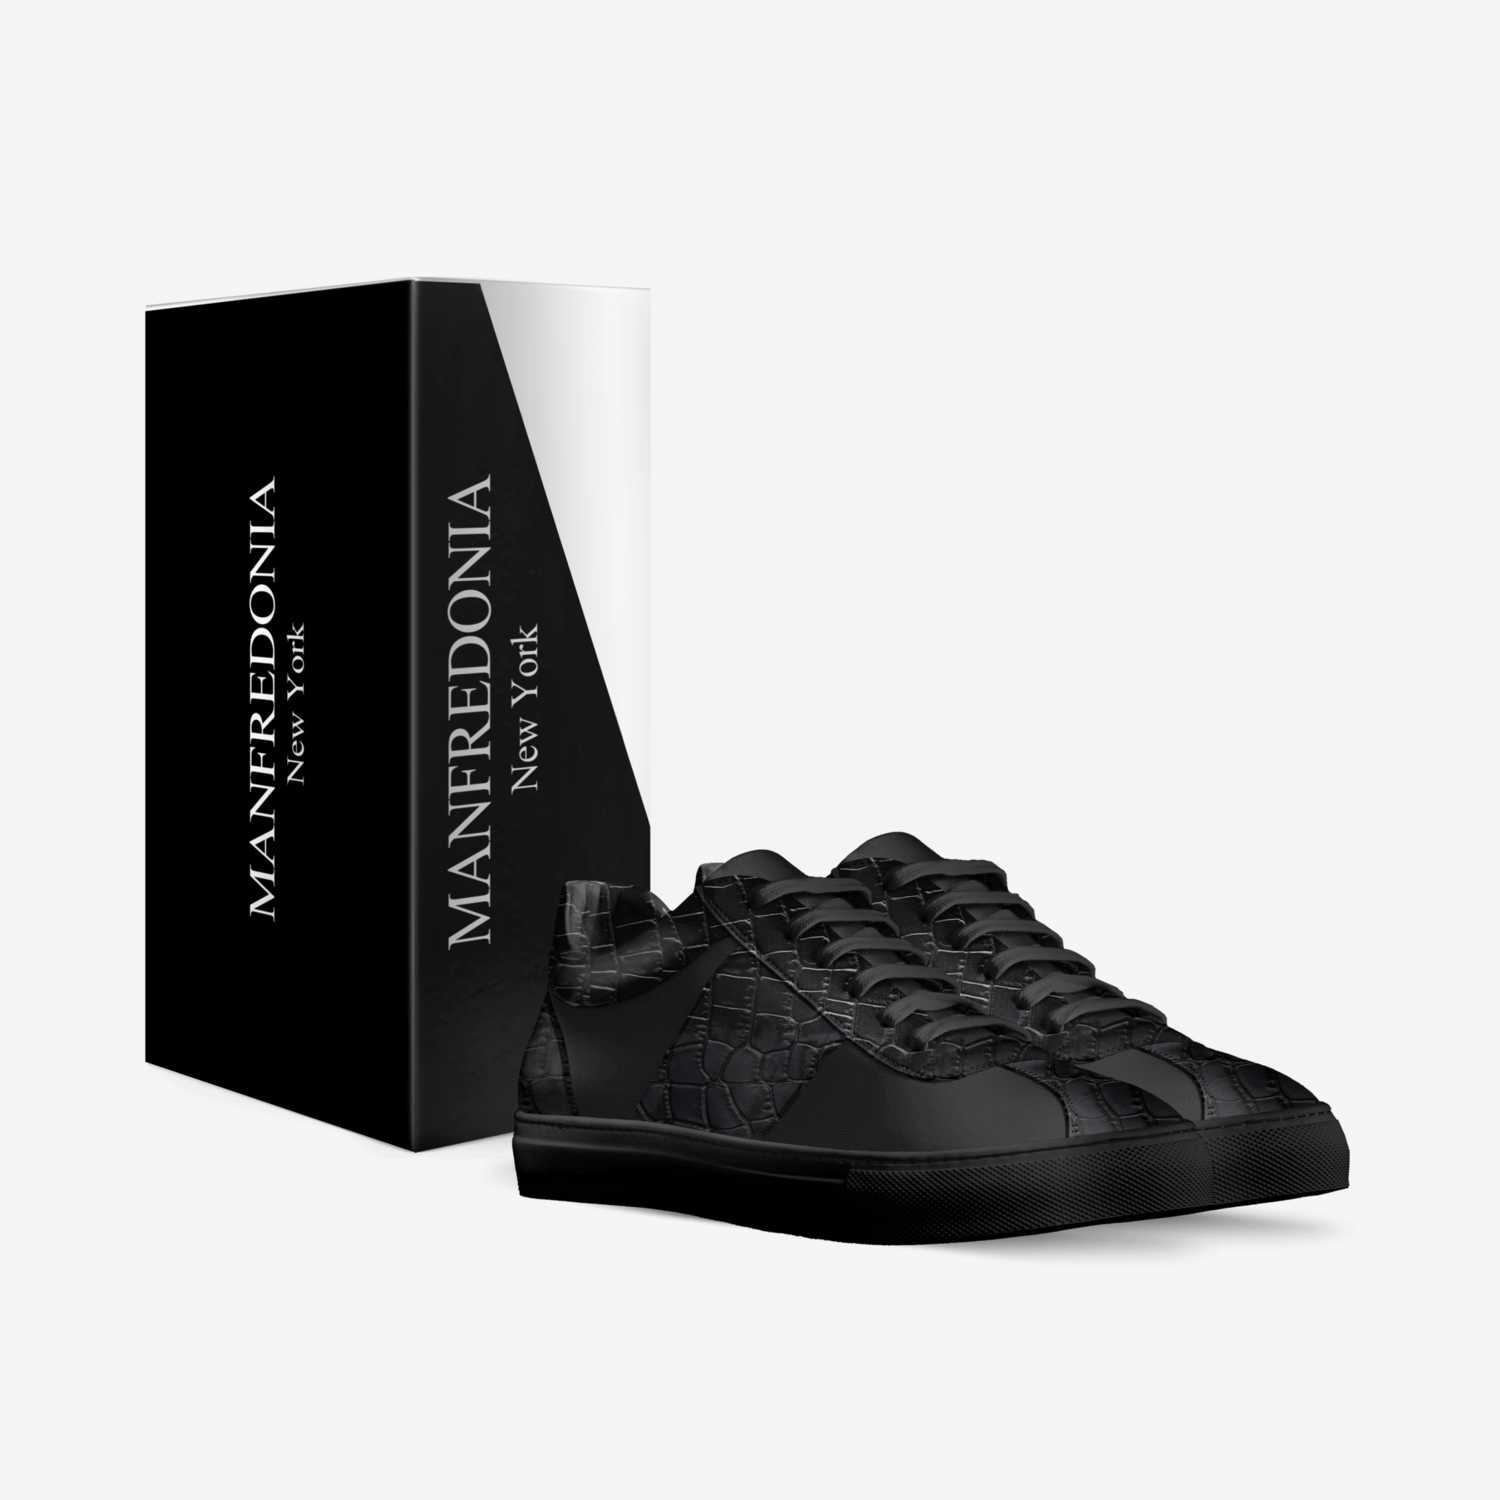 MANFREDONIA  custom made in Italy shoes by Anthony Manfredonia | Box view